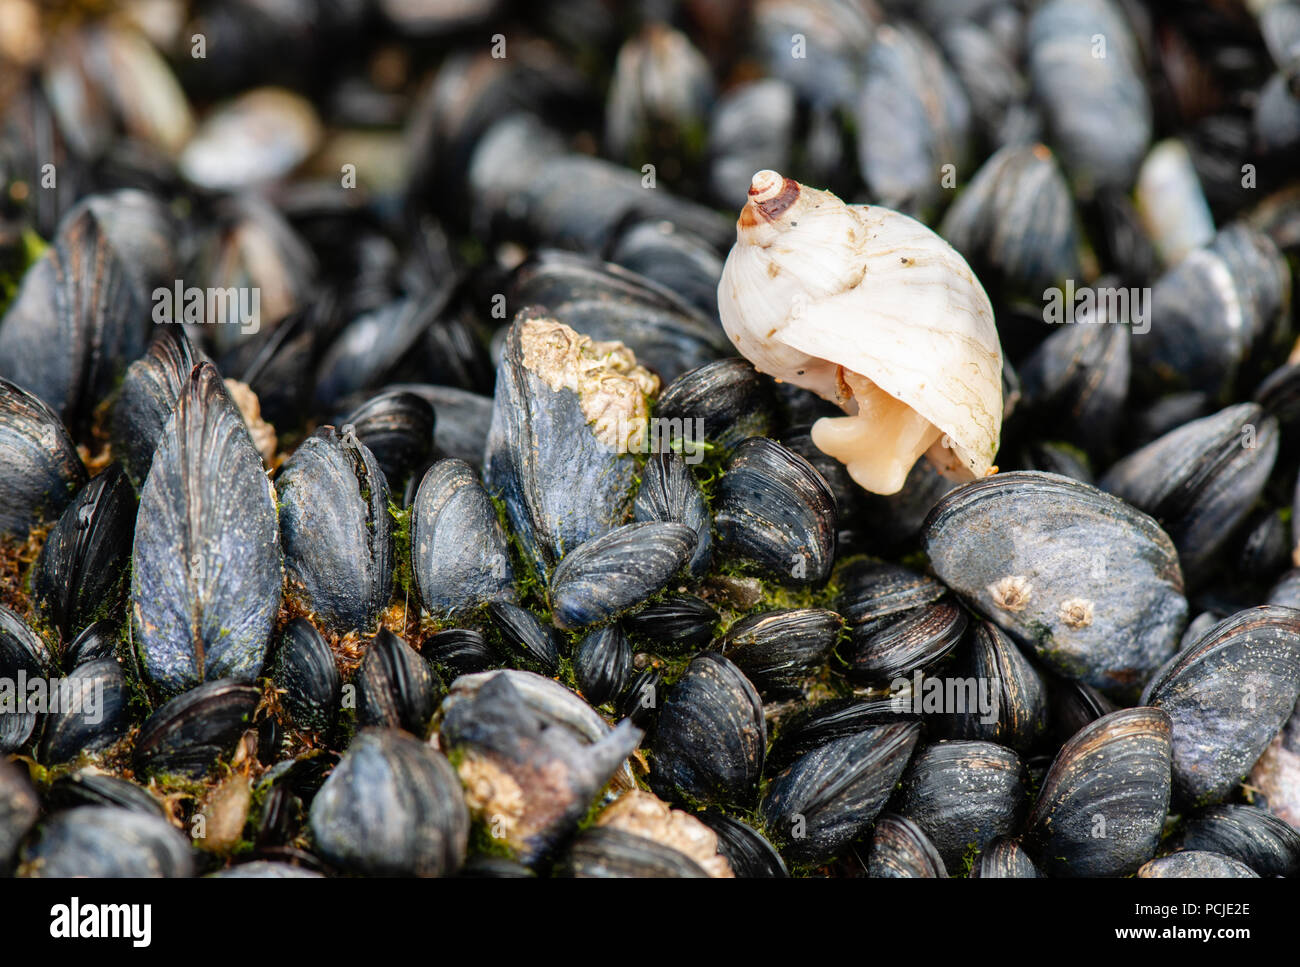 Close up of snail on a bed of mussels on a rock at the seaside in Bude, Cornwall Stock Photo